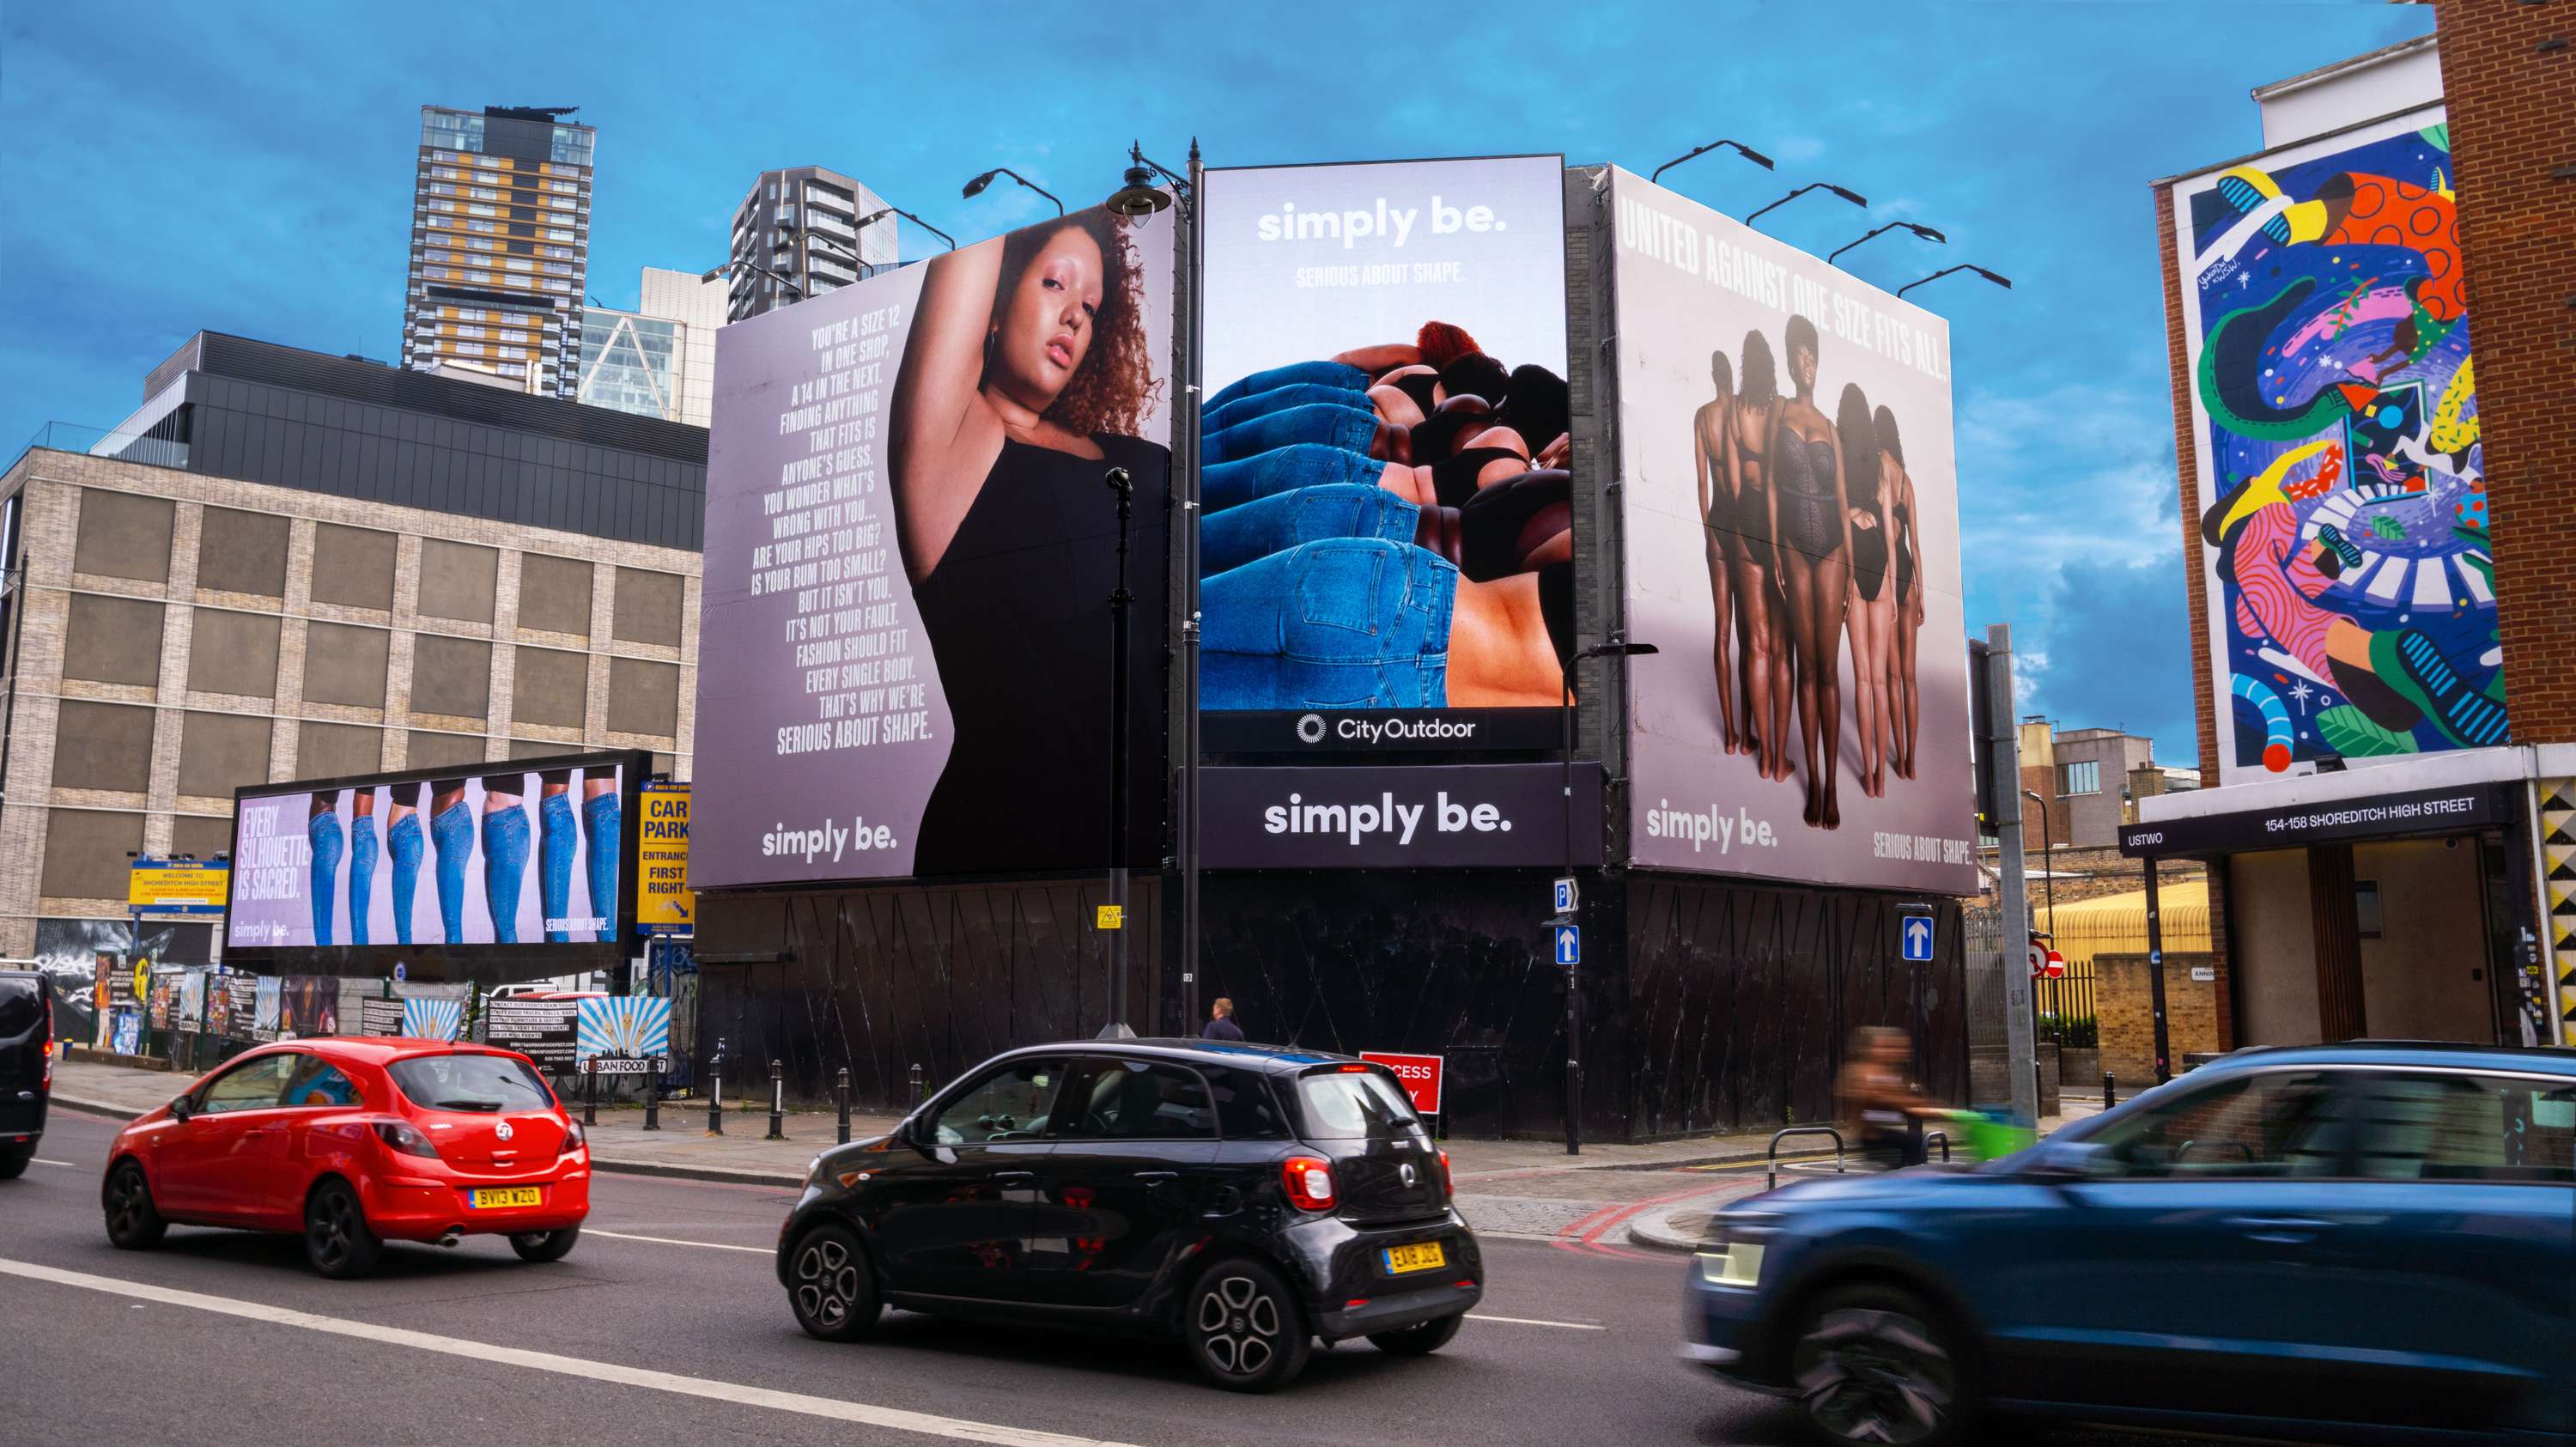 If the billboard fits: Simply Be launches 'Serious About Shape' campaign